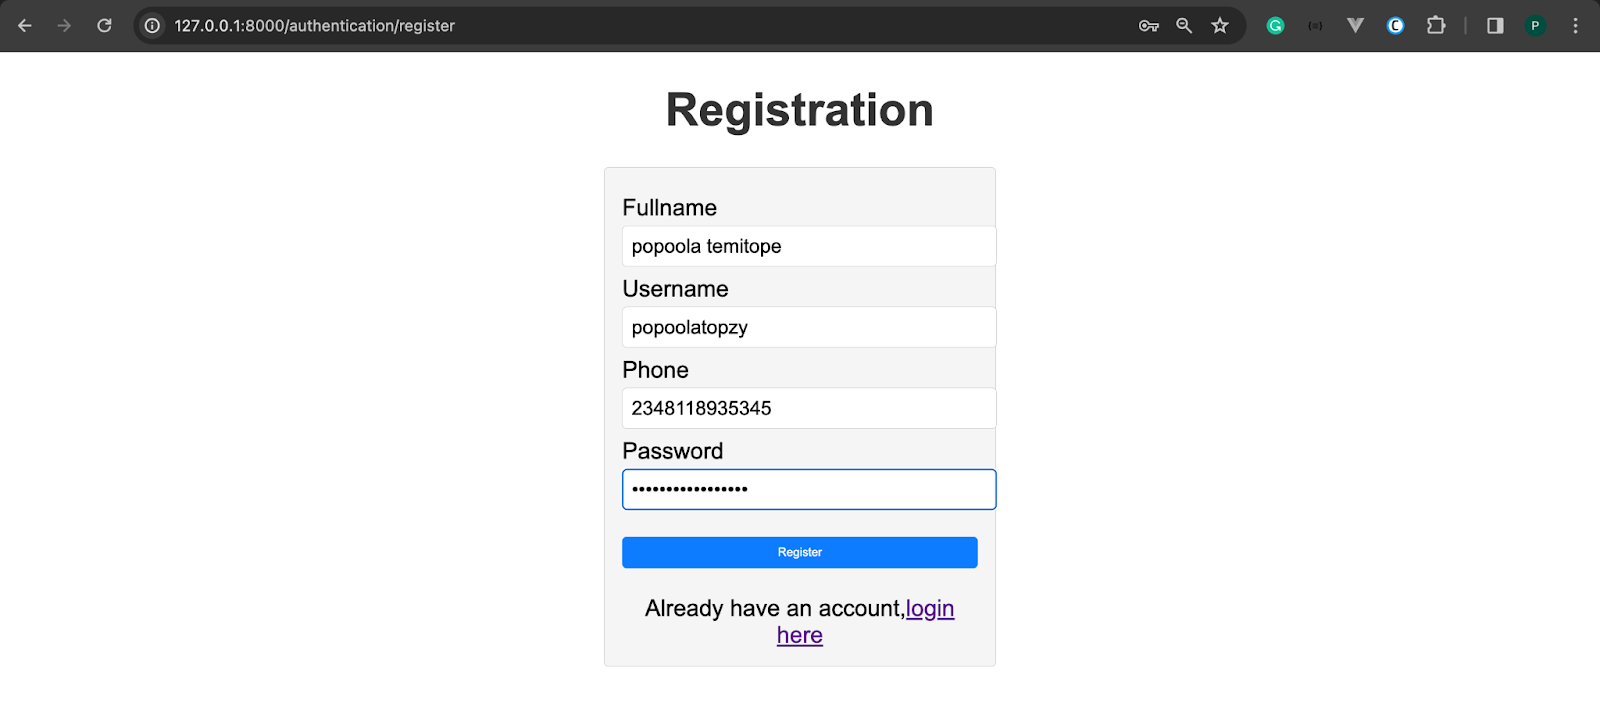 The registration page of the application with the new user"s full name, username, phone number, and password entered into the registration form.